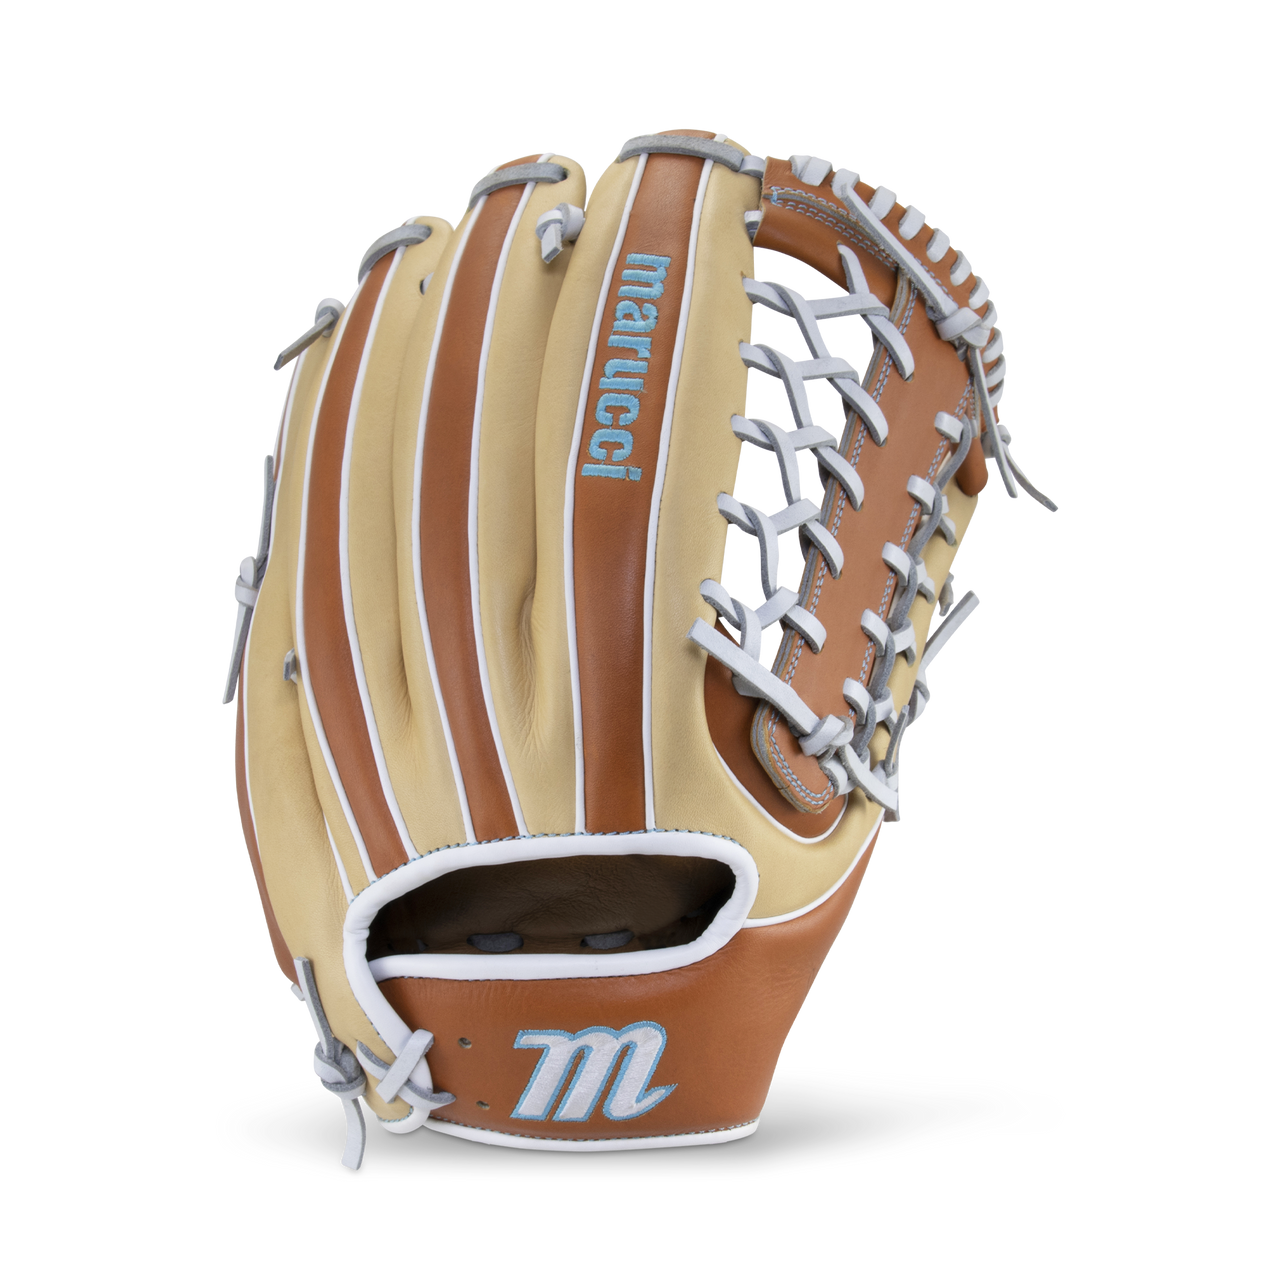 marucci-acadia-fastpitch-softball-glove-99r4-13-inch-t-web-right-hand-throw MFGACFP99R4-CMCB-RightHandThrow Marucci  The ACADIA FASTPITCH M TYPE 99R4FP 13 T-WEB is a top-of-the-line